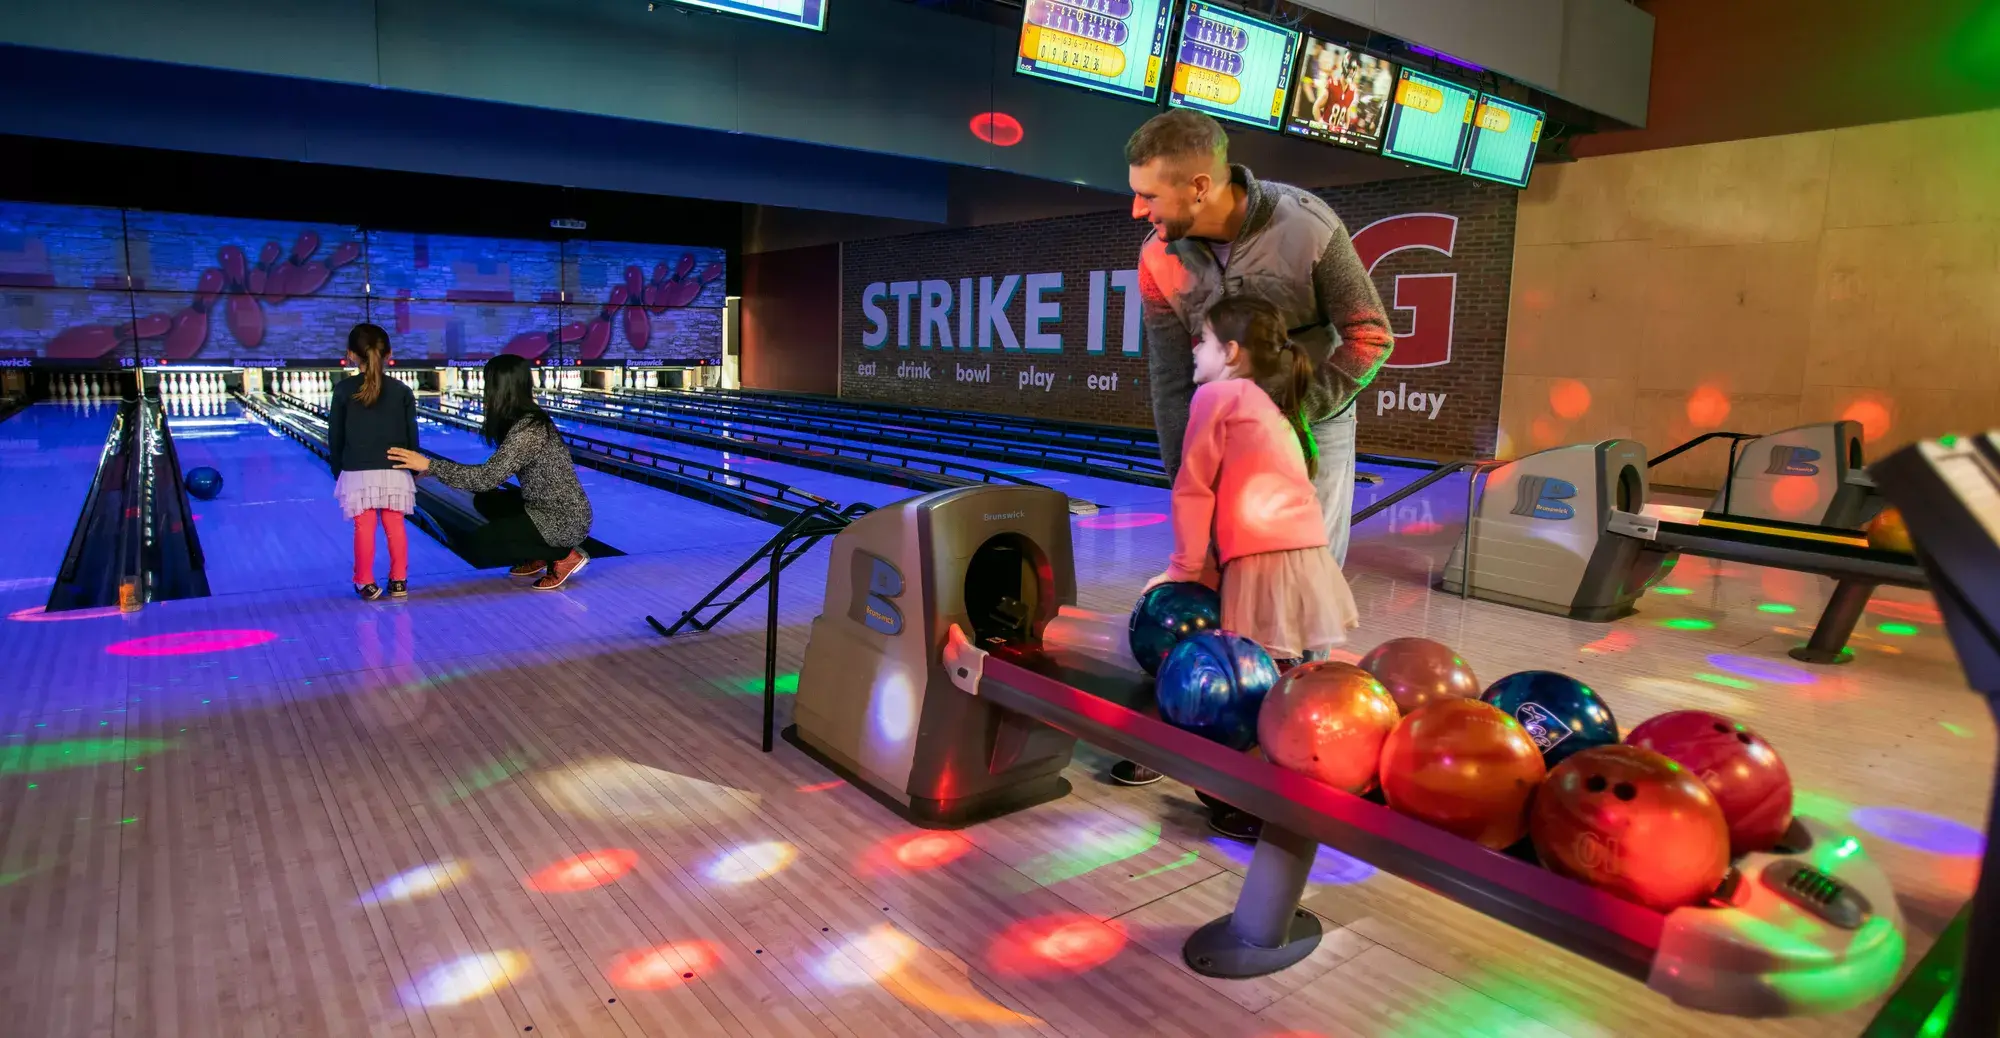 Splitsville - All You Need to Know BEFORE You Go (with Photos)